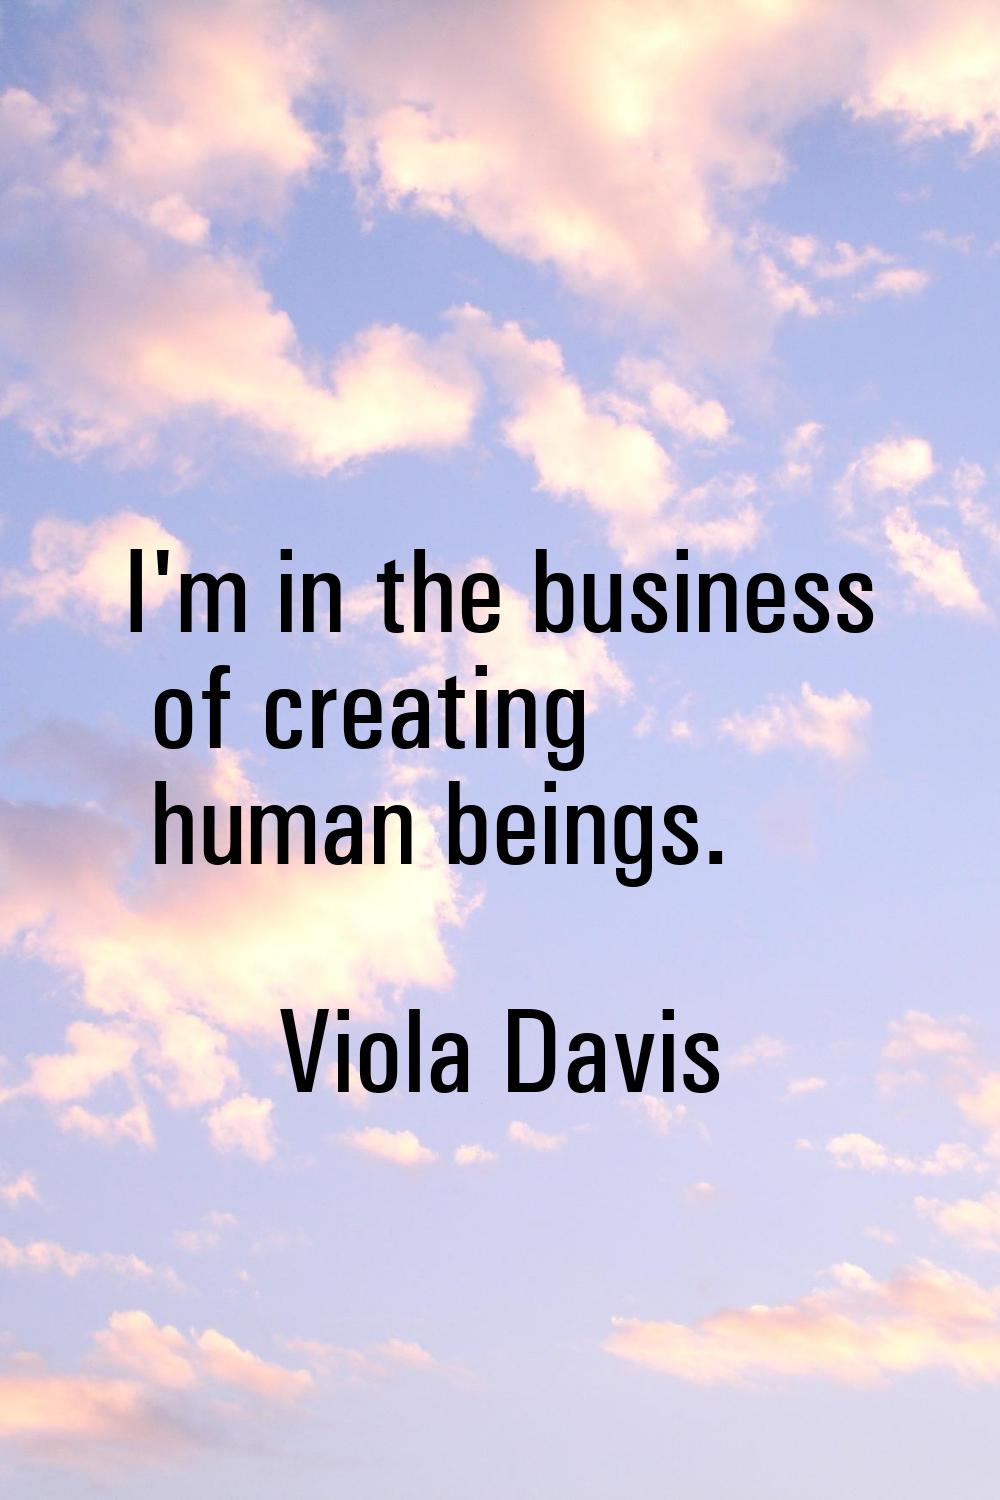 I'm in the business of creating human beings.